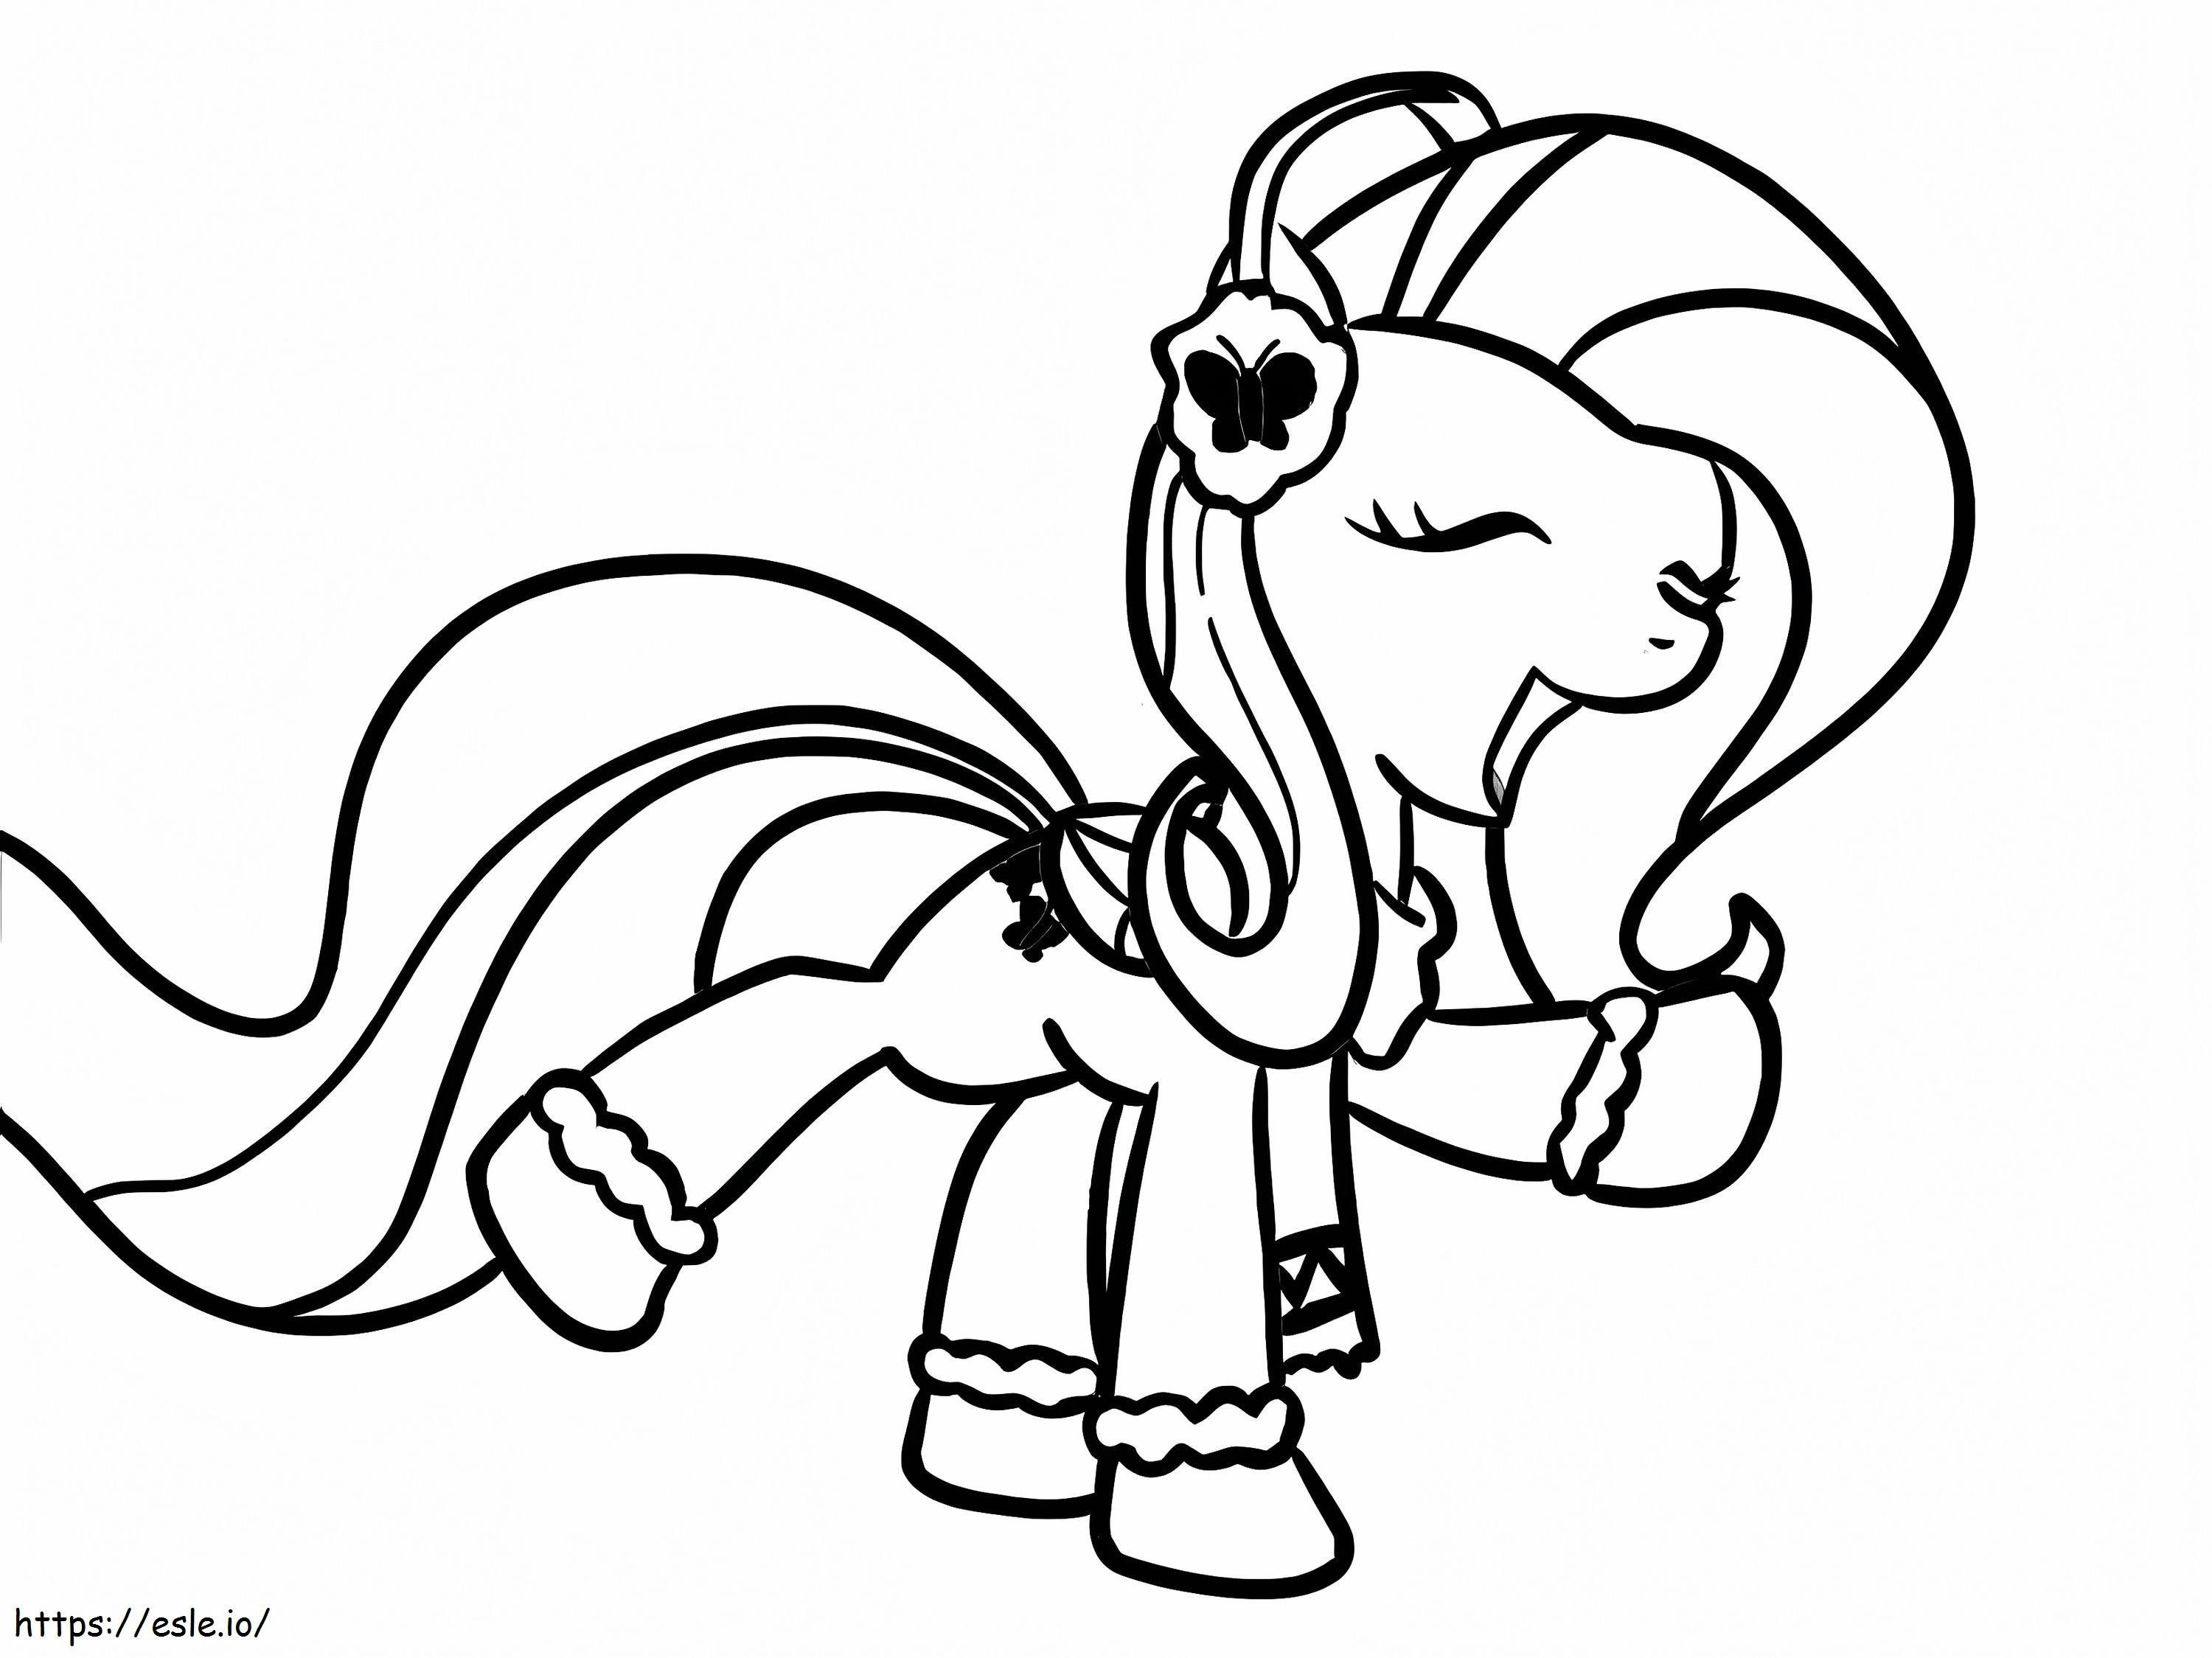 Magic Fluttershy coloring page